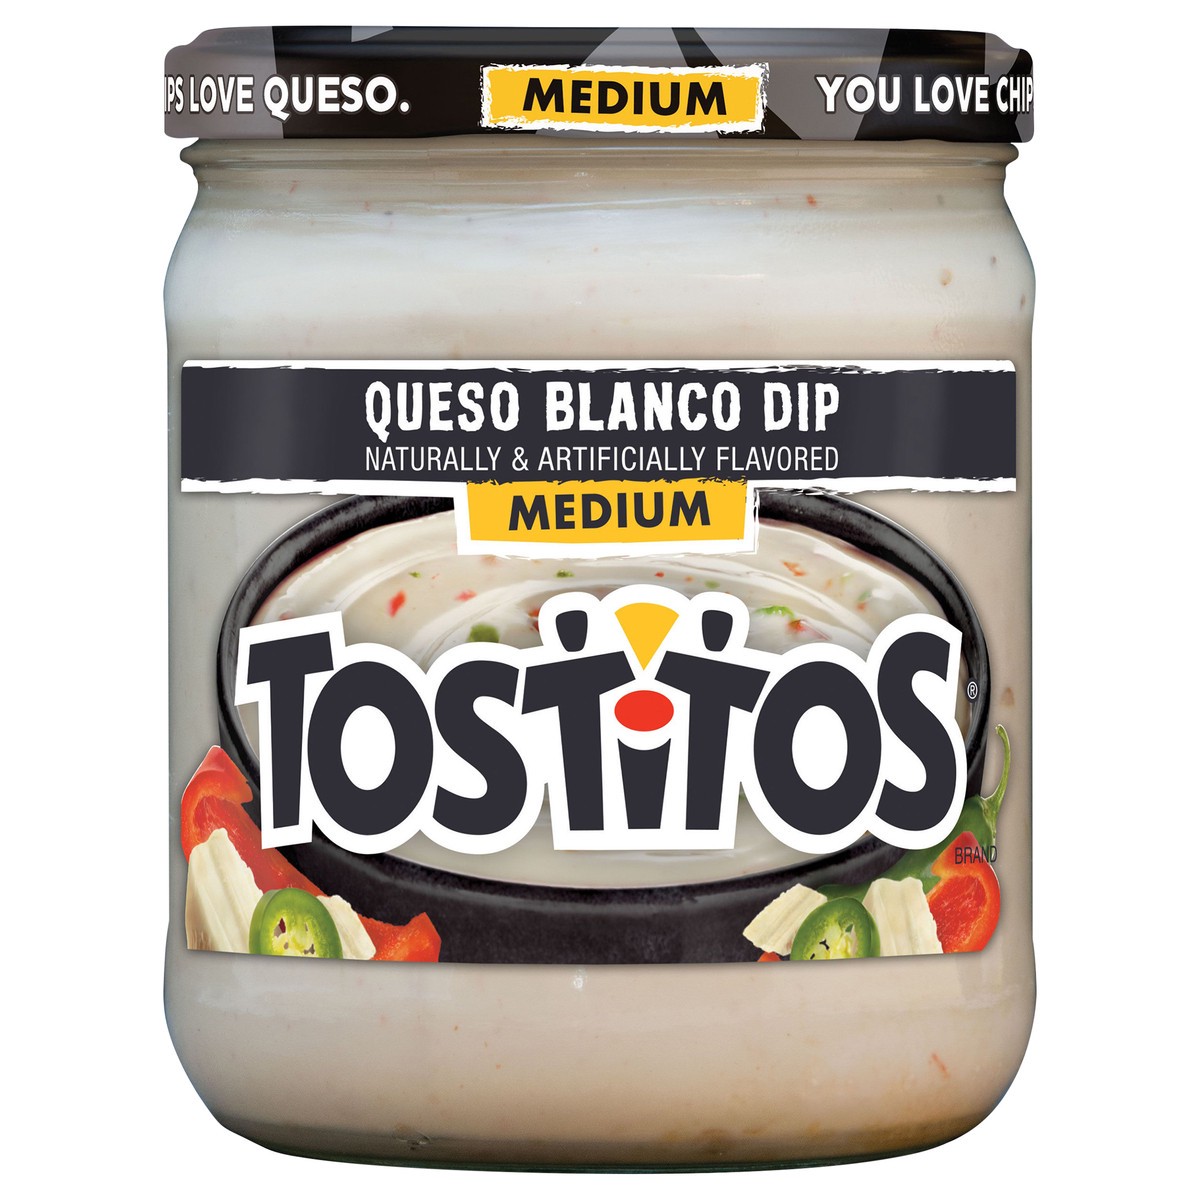 slide 1 of 1, Tostitos Medium Dip Queso Blanco Naturally & Artificially Flavored 15 Oz, 1 ct